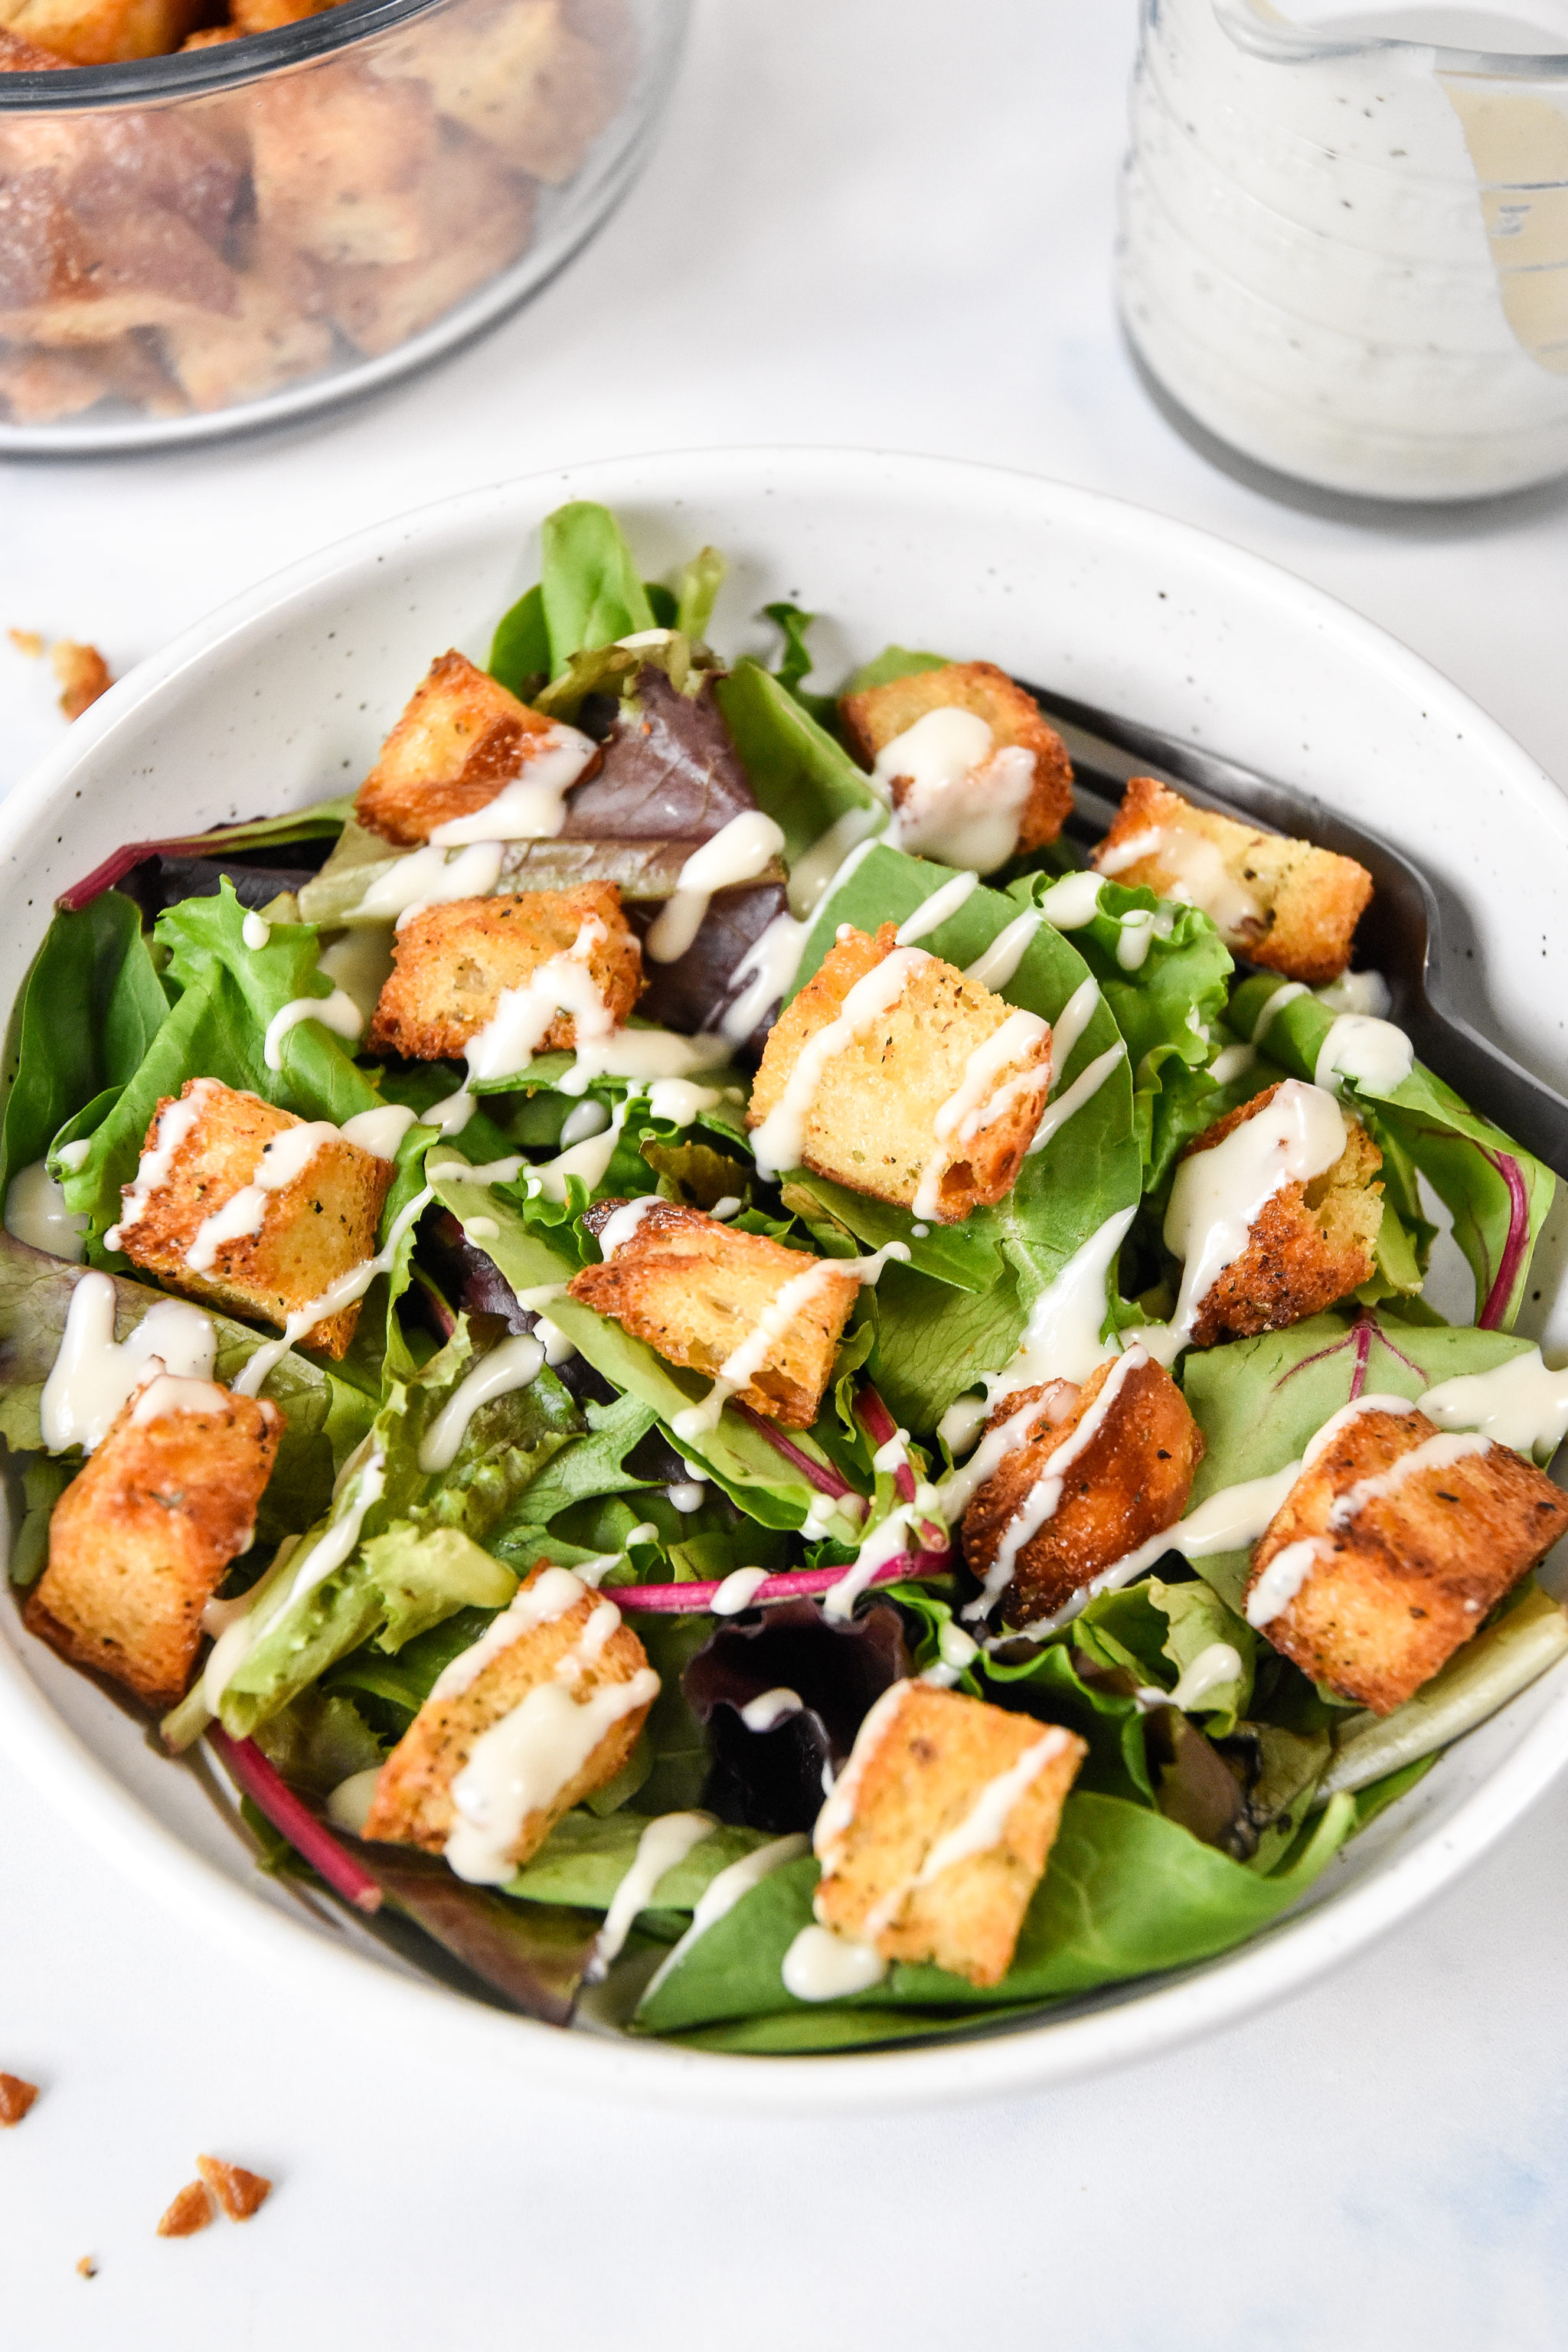 homemade croutons in a salad with ranch drizzle.